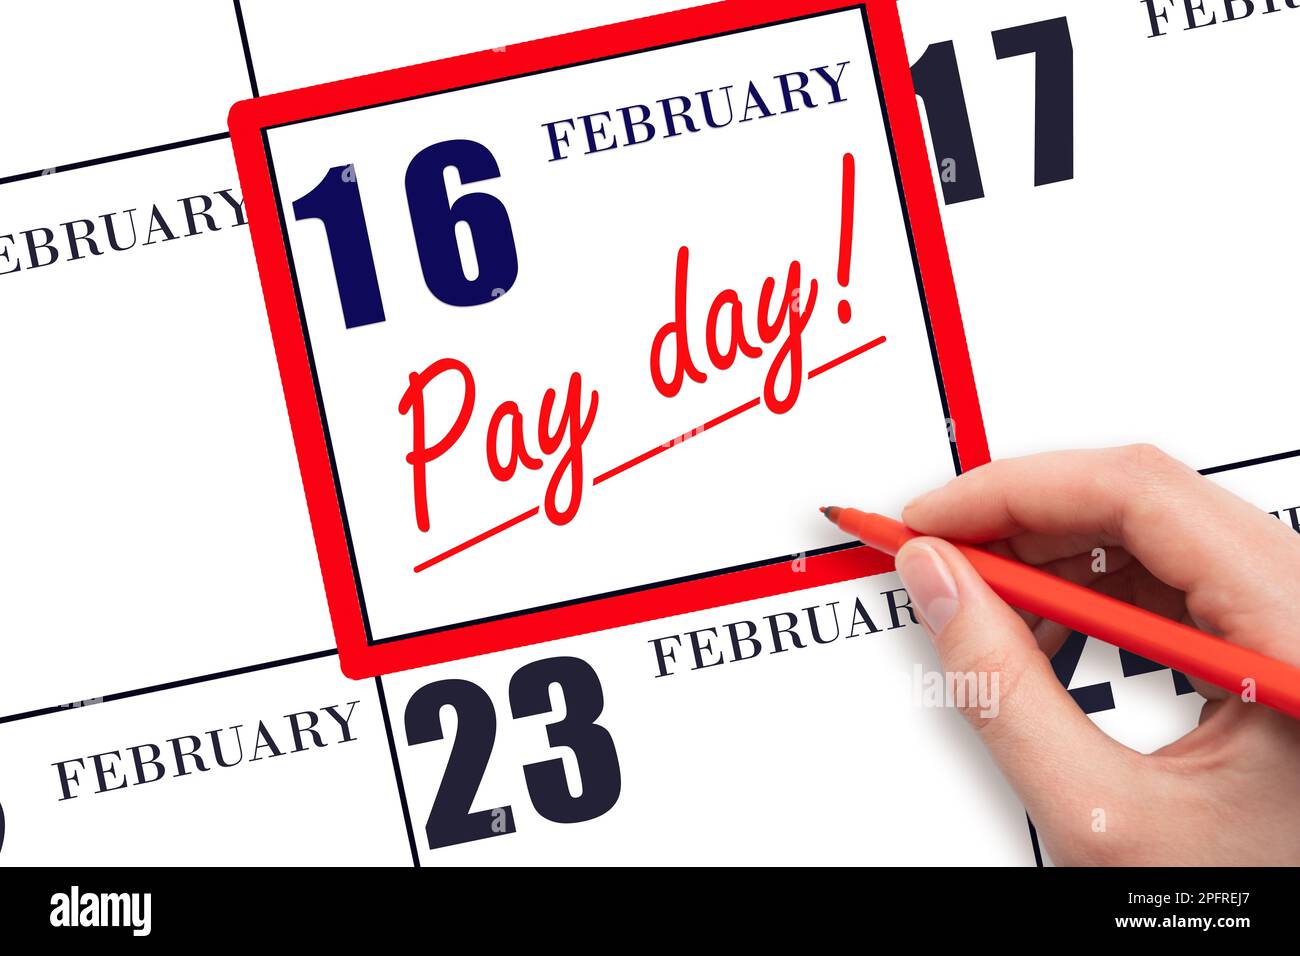 16th day of February. Hand writing text PAY DATE on calendar date February 16 and underline it. Payment due date.  Reminder concept of payment. Winter Stock Photo